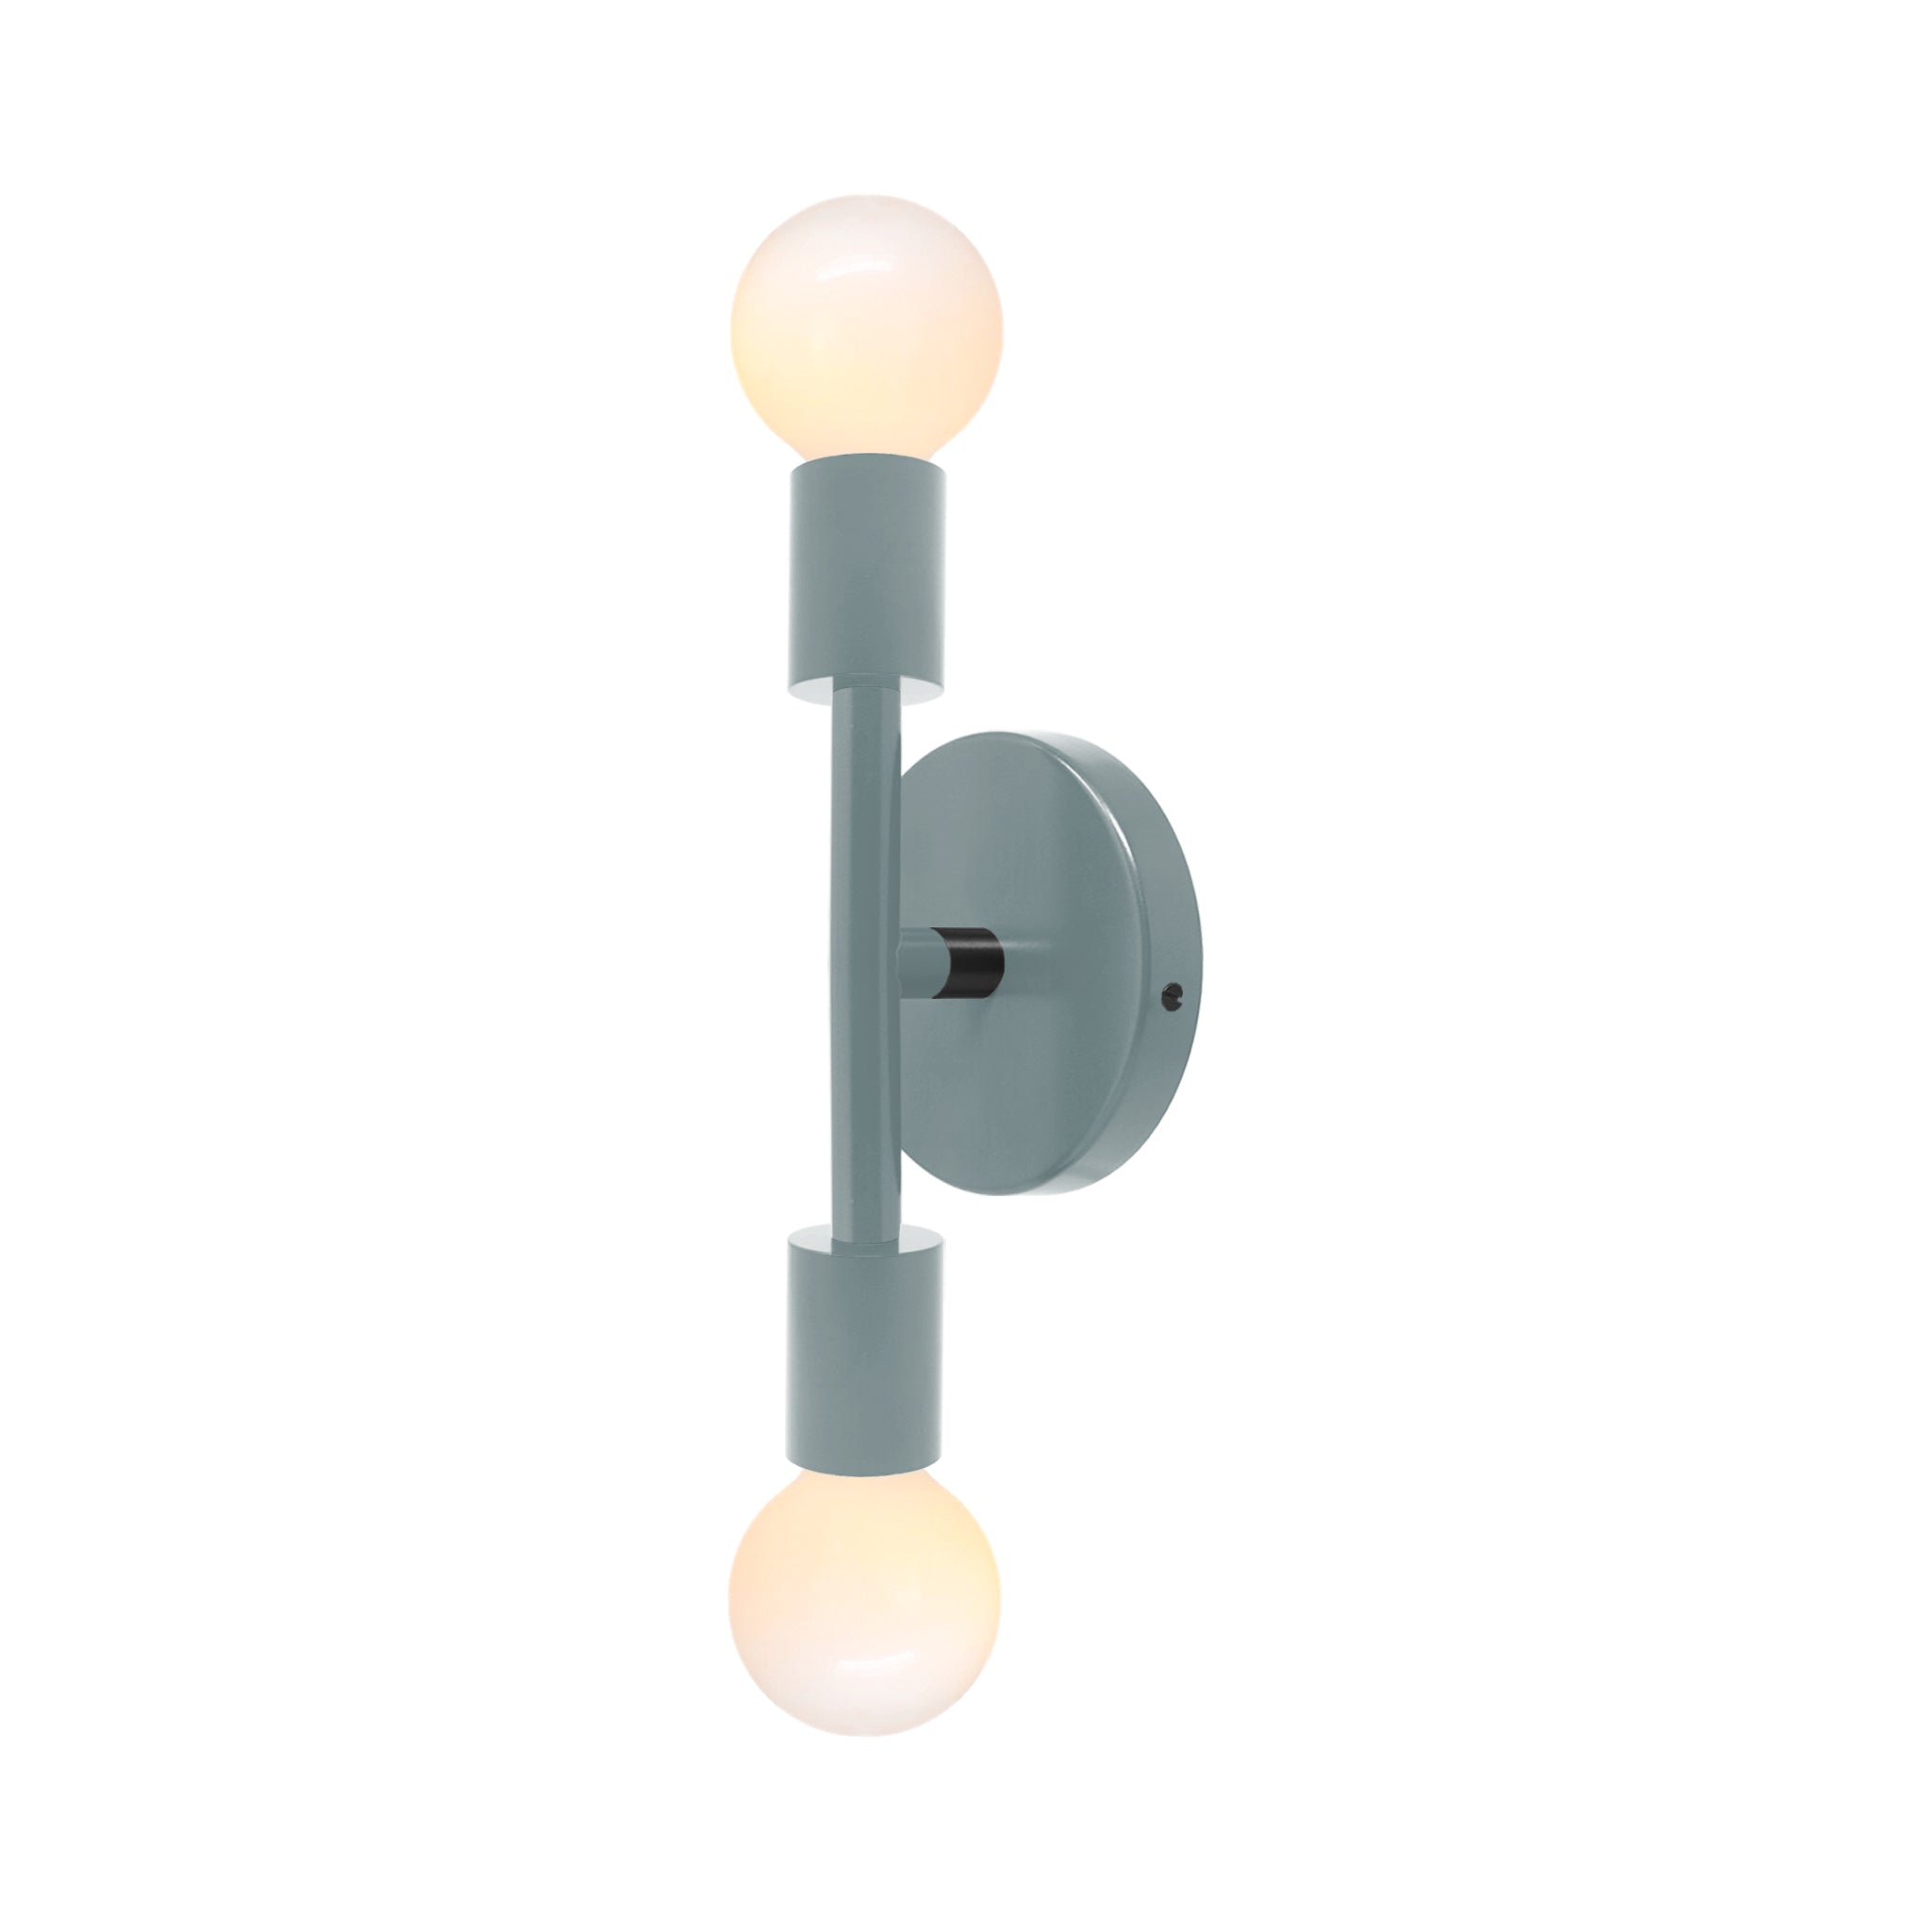 Black and lagoon color Pilot sconce 11" Dutton Brown lighting